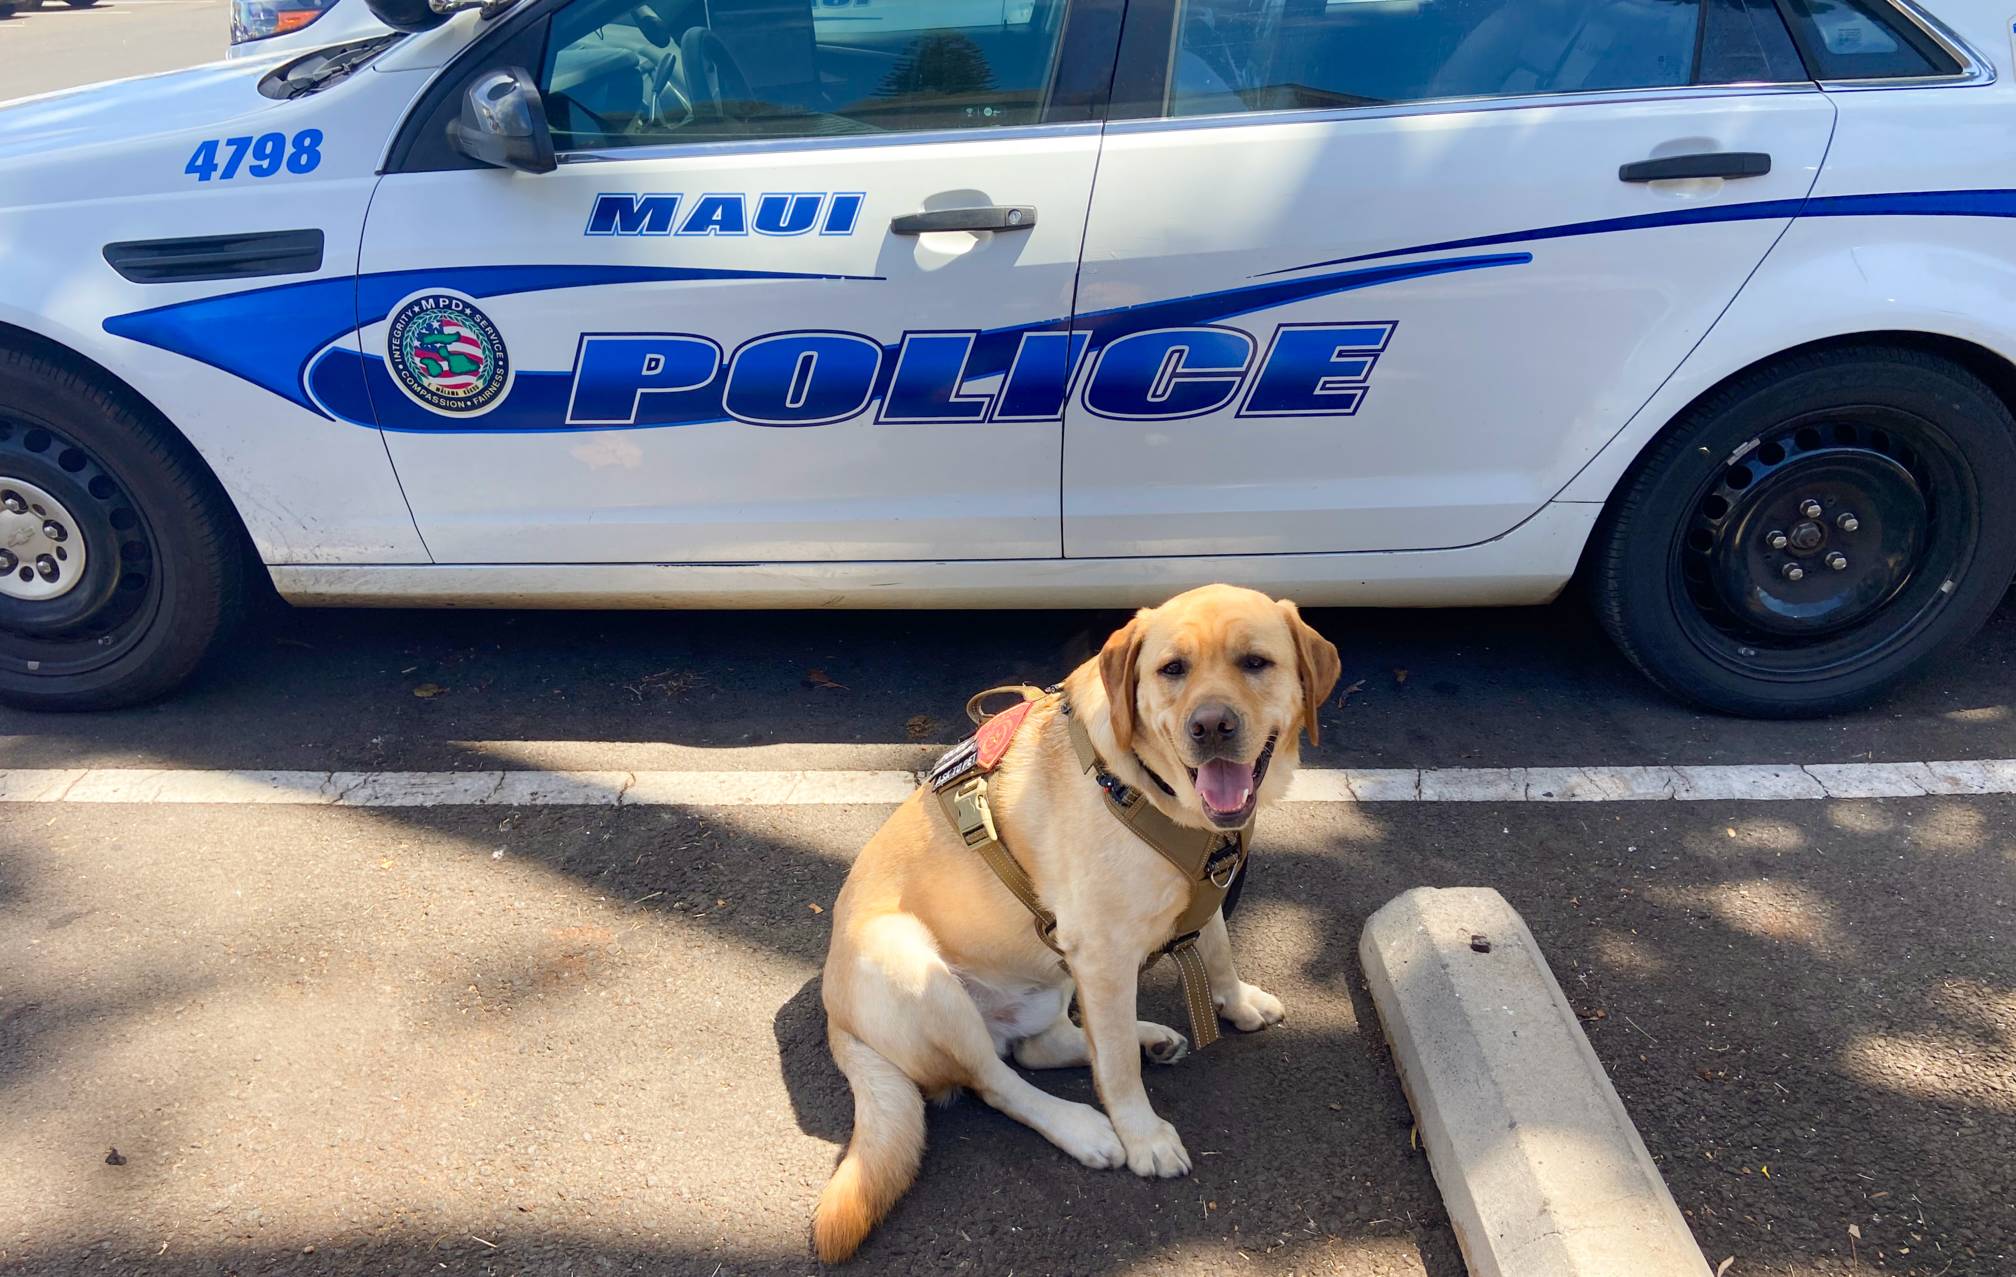 UPD police therapy dog in front of police car